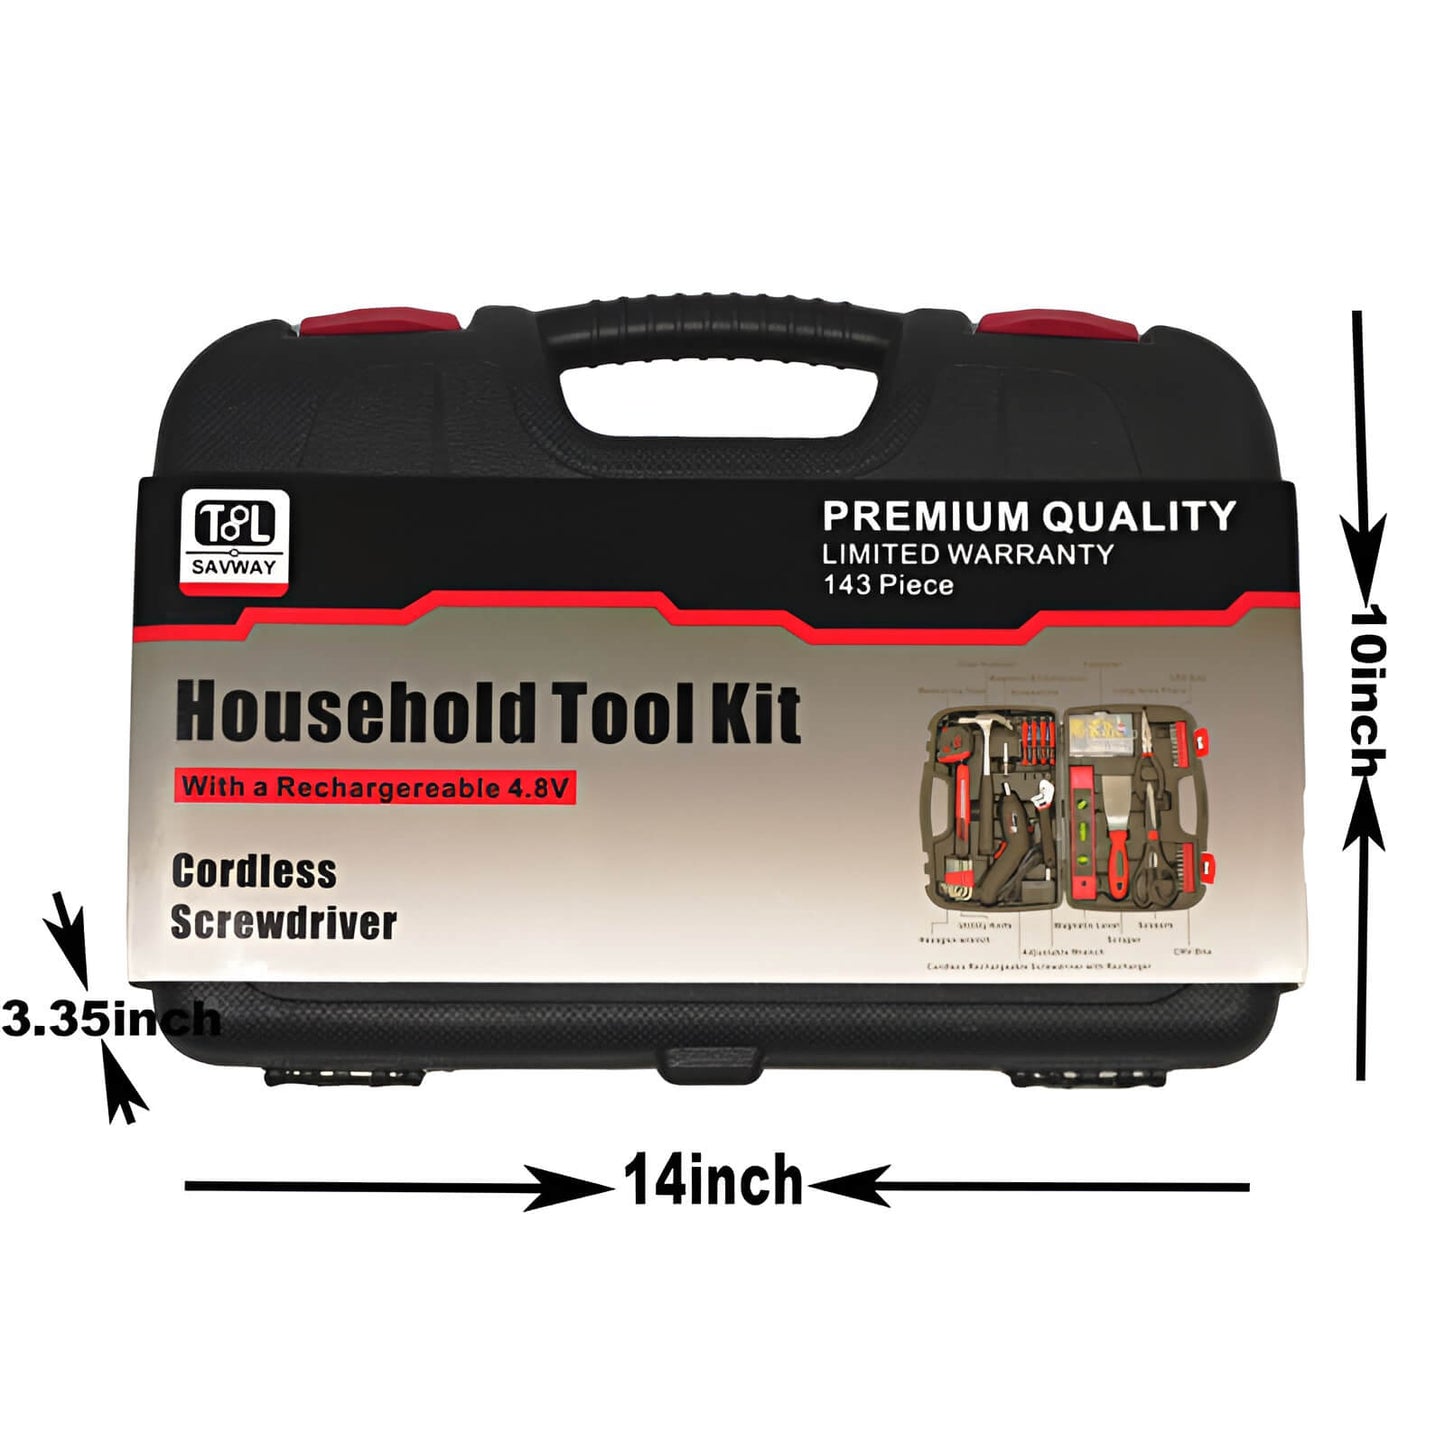 143-piece Home Tool Kit with Cordless Screwdriver